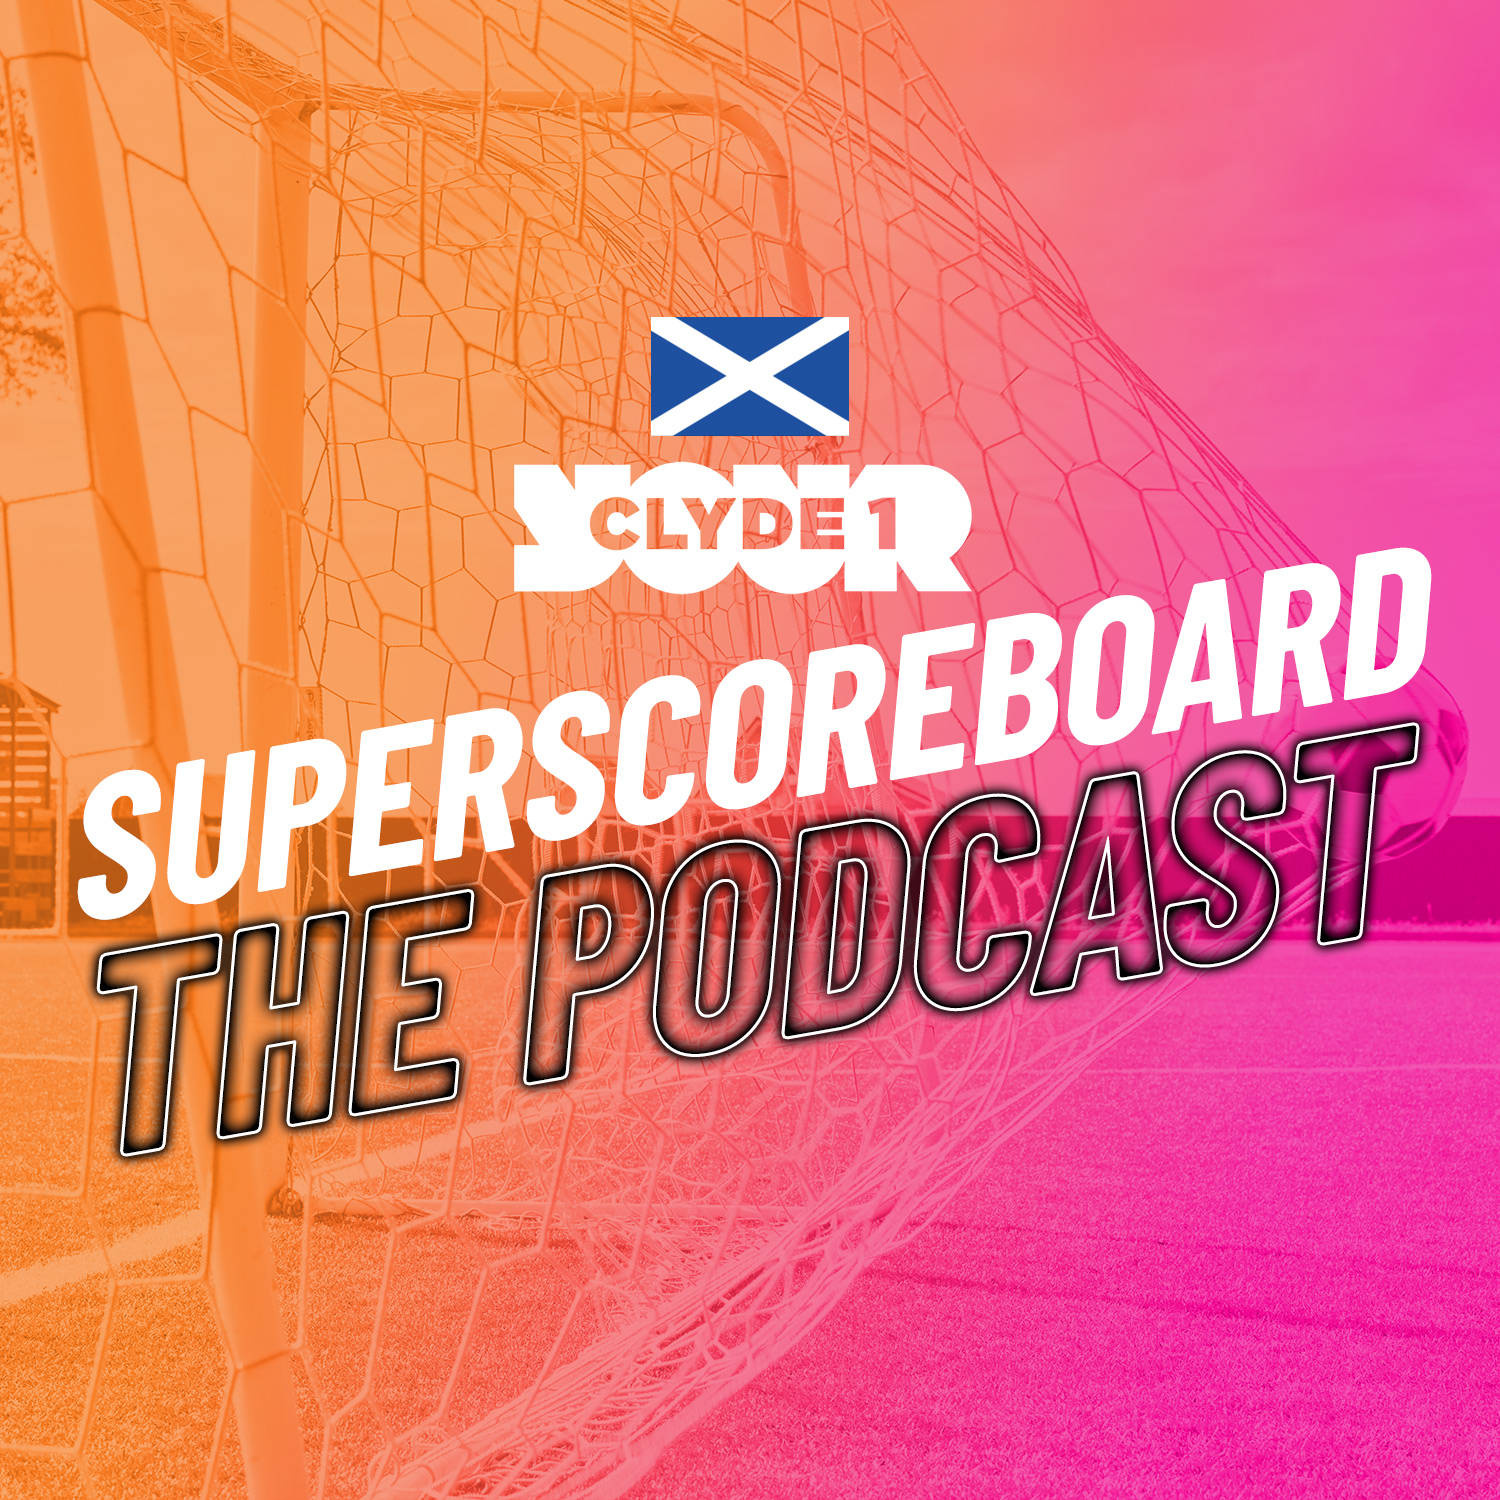 Tuesday 13th February Clyde 1 Superscoreboard